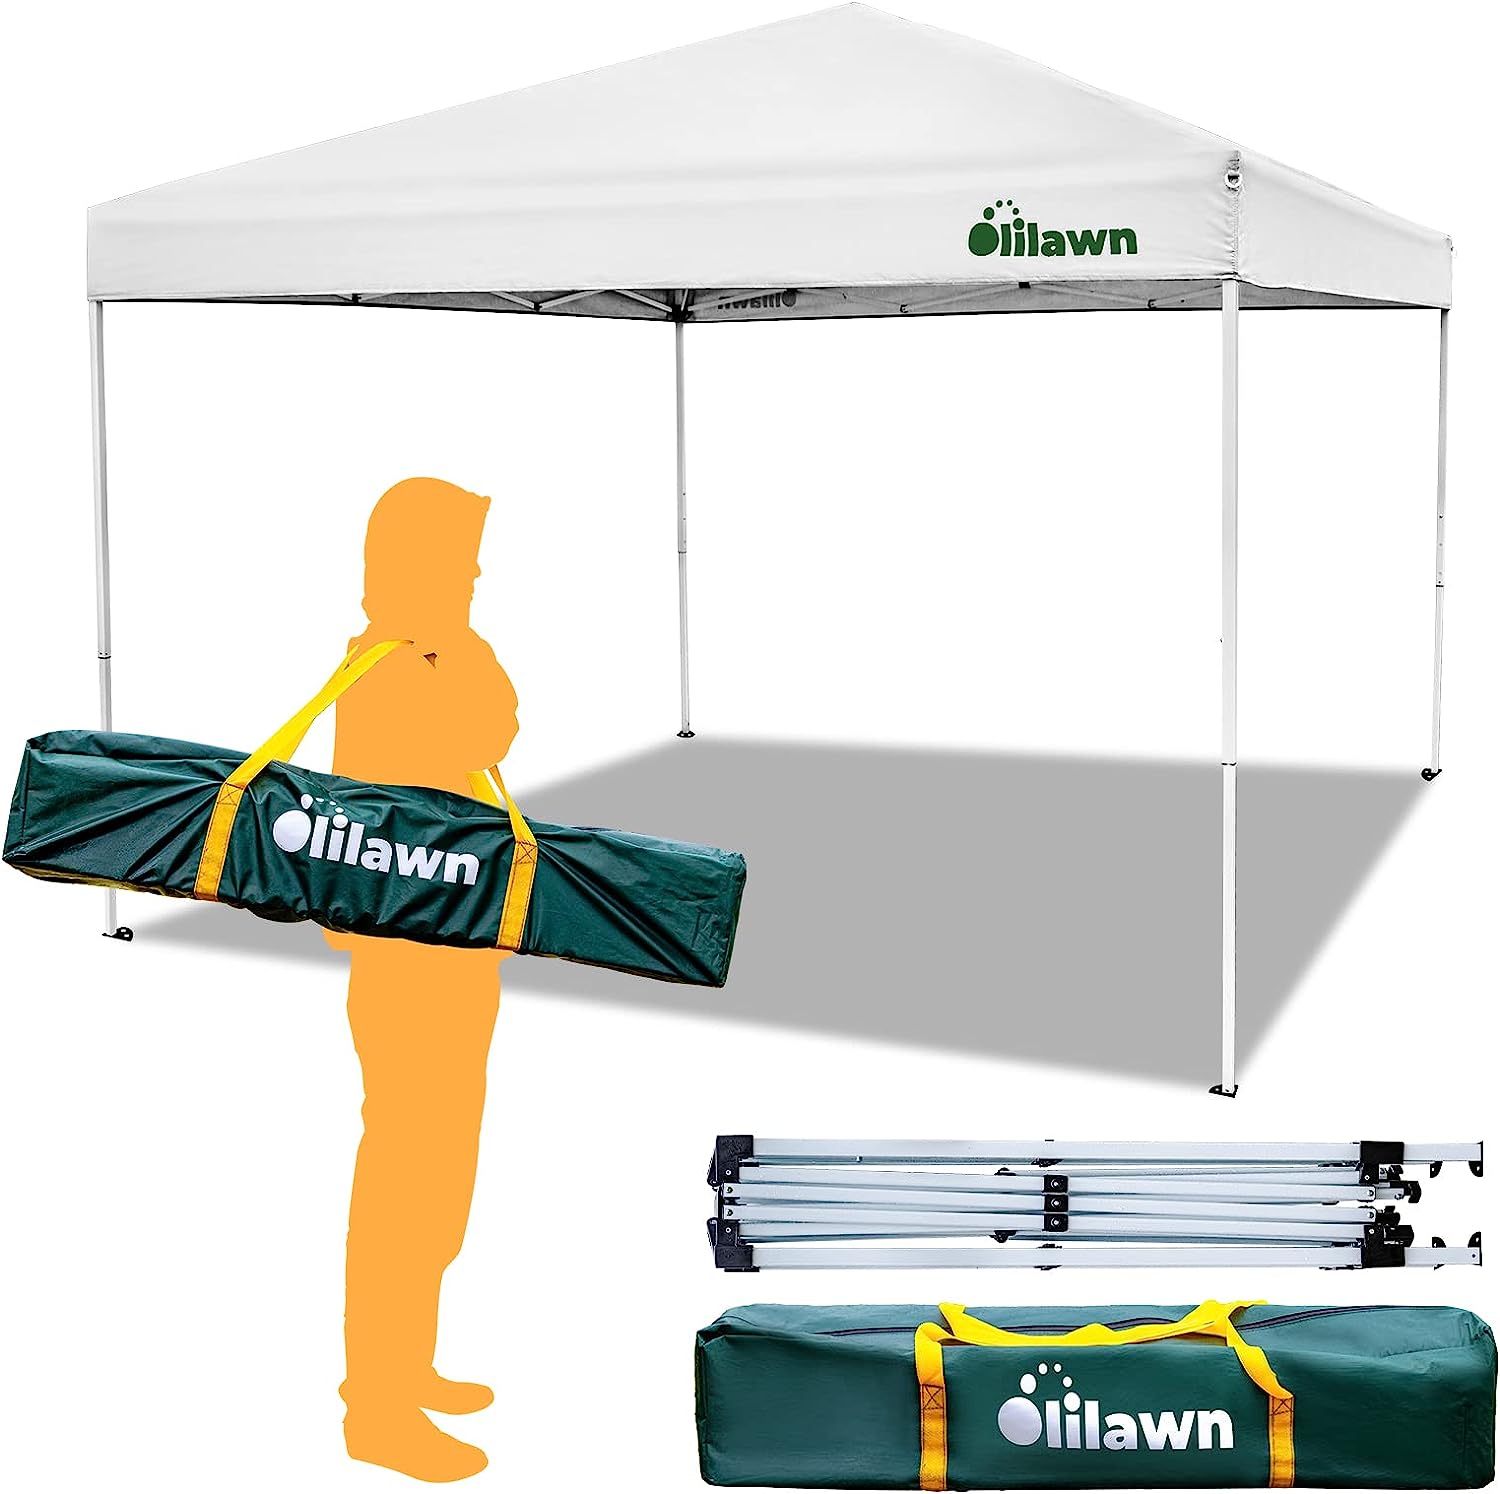 10x10 Canopy Pop up Canopy OLILAWN, Canopy Tent 10x10 with UPF 50+ Waterproof